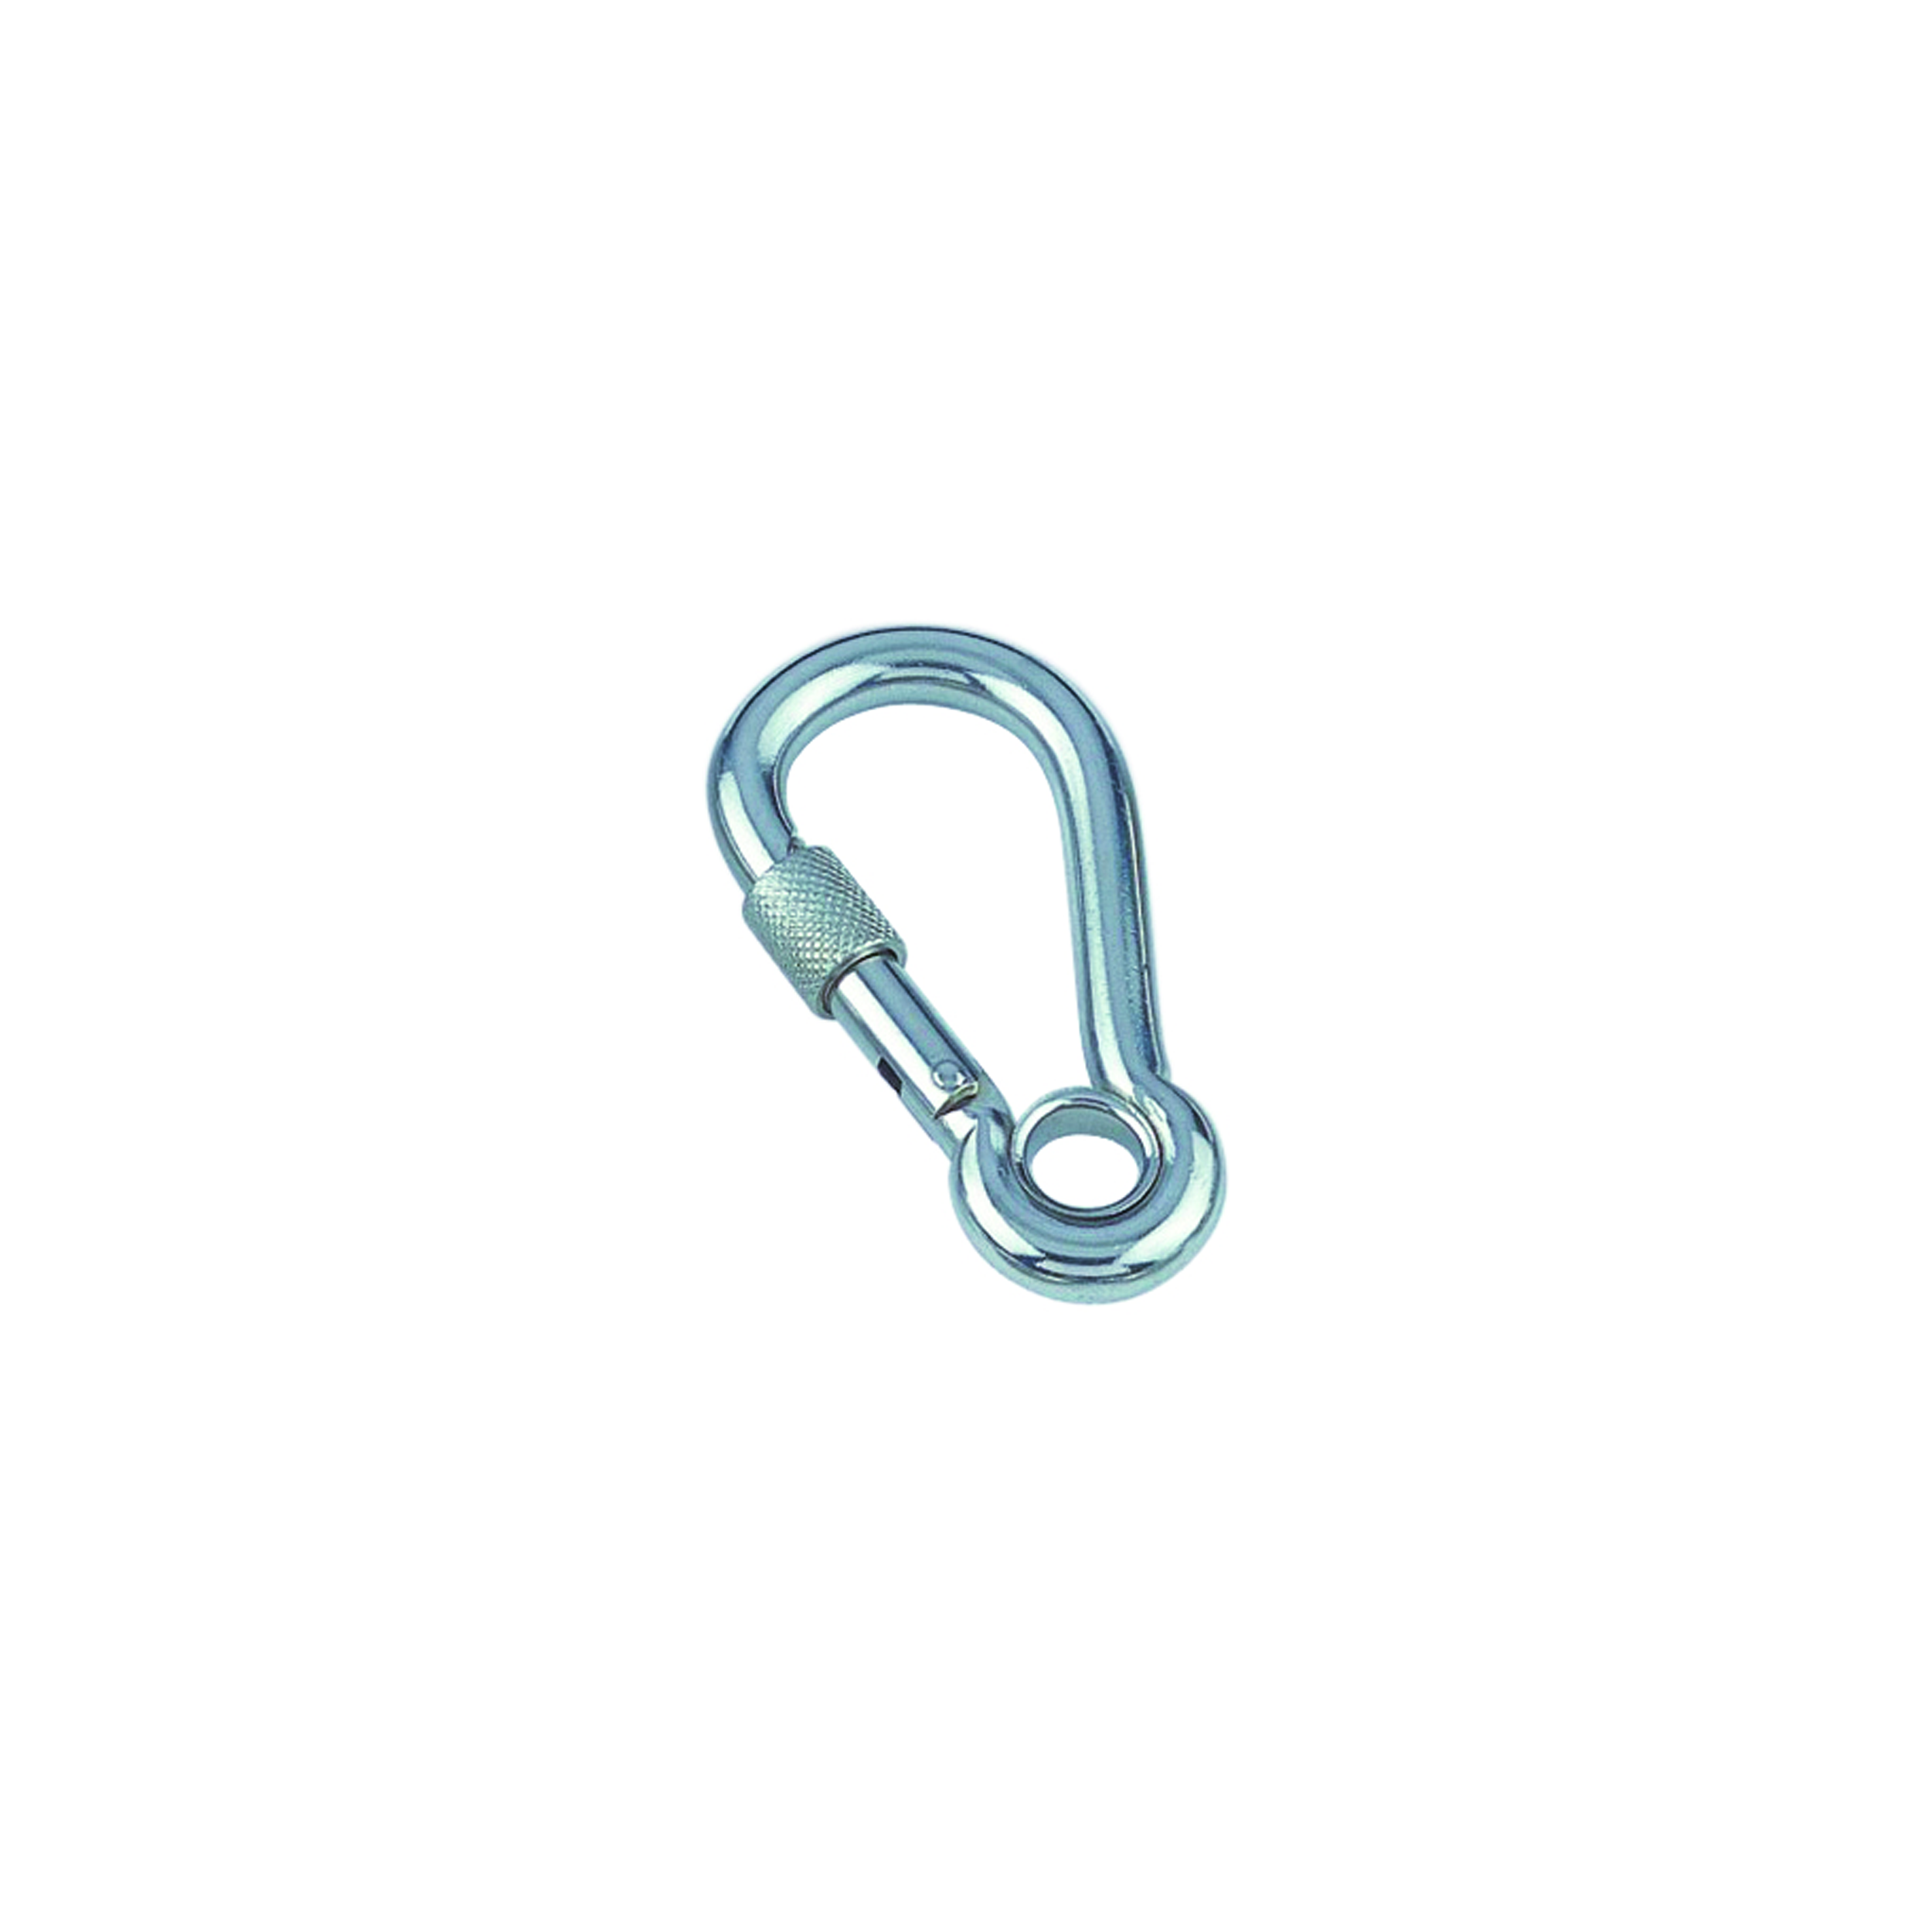 10 STCK / PCS. Spring hook with screw sleeve and eyelet A4  4x40mm